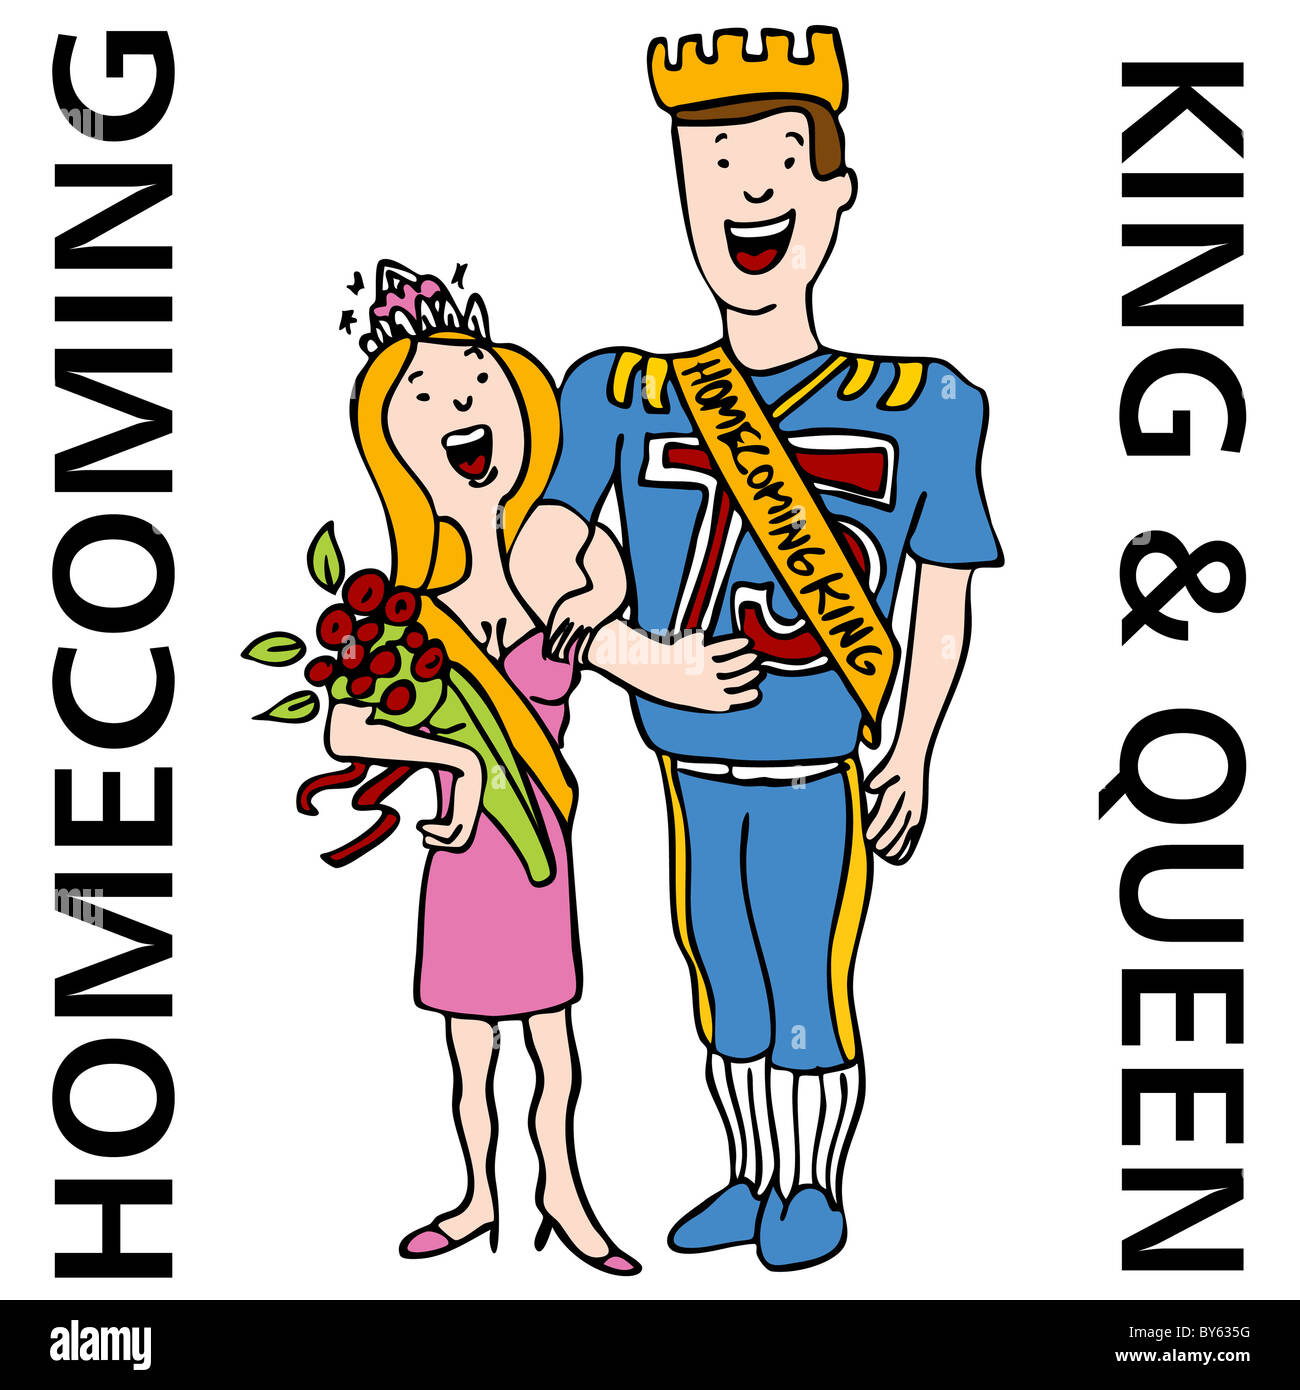 An image of the homecoming king and queen. Stock Photo